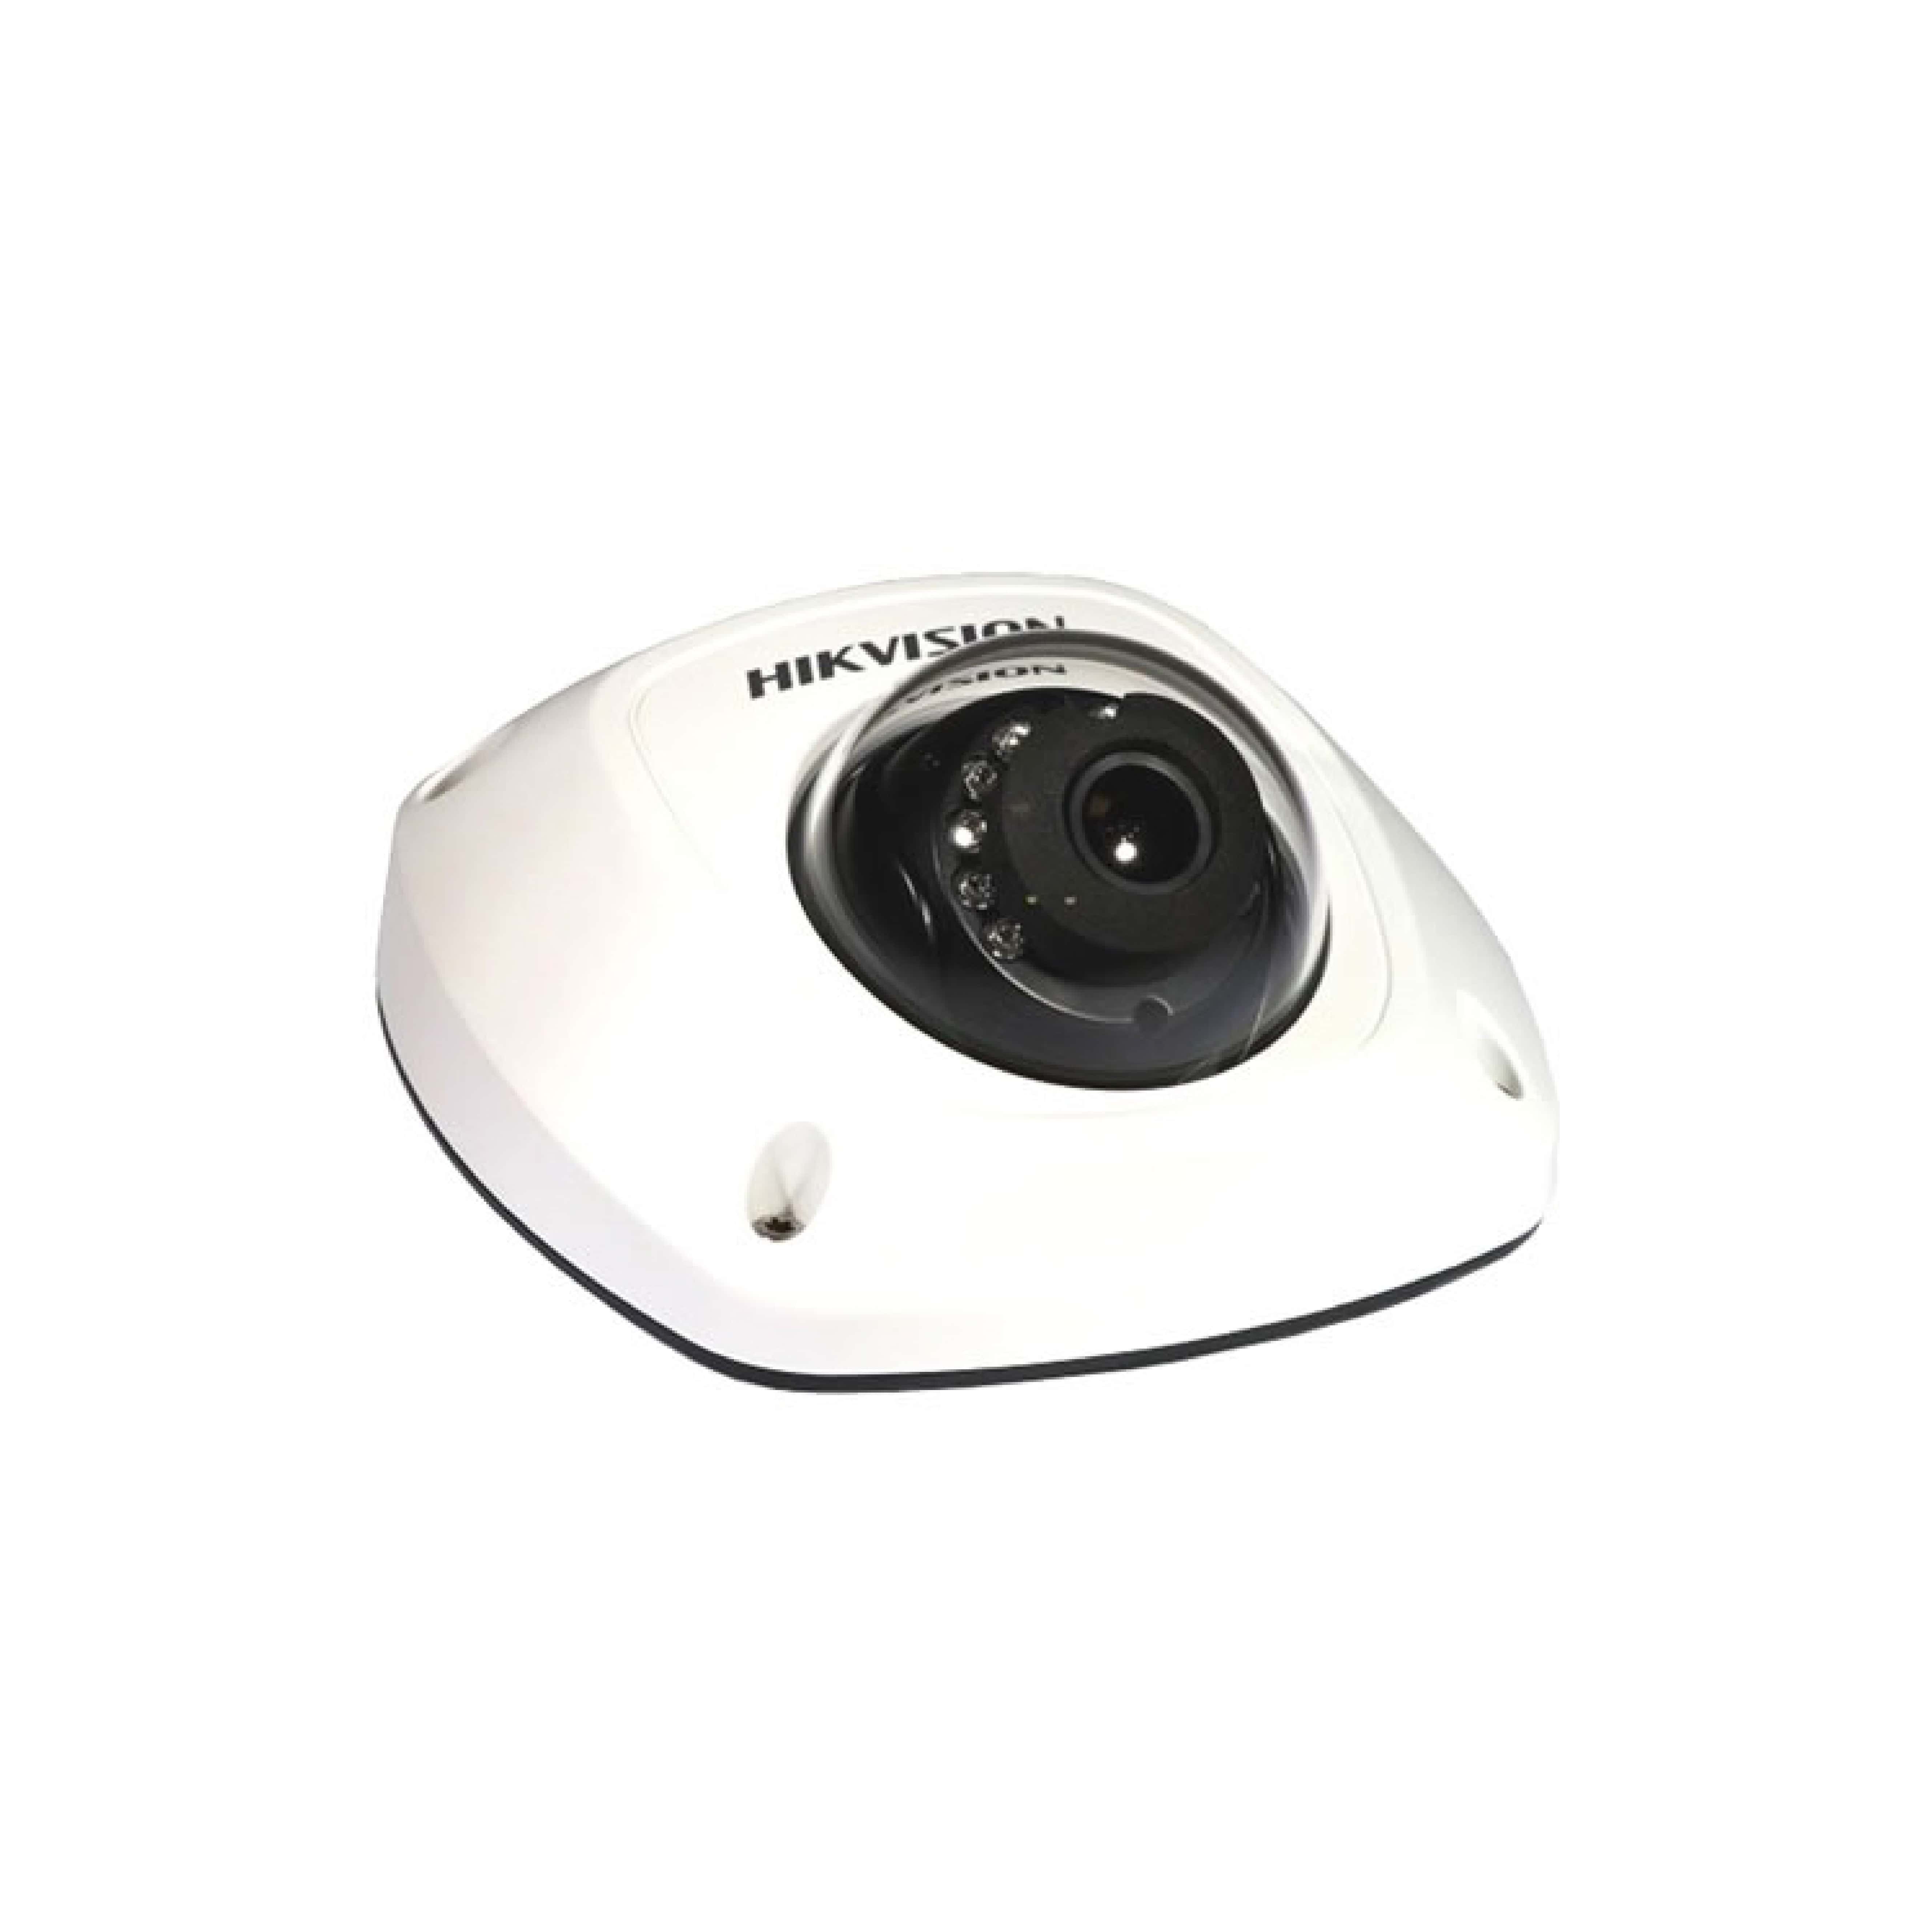 Mắt Camera IP/Wifi Hikvision DS-2CD2523G0-IWS 2.0 Mpx lắp trong nhà